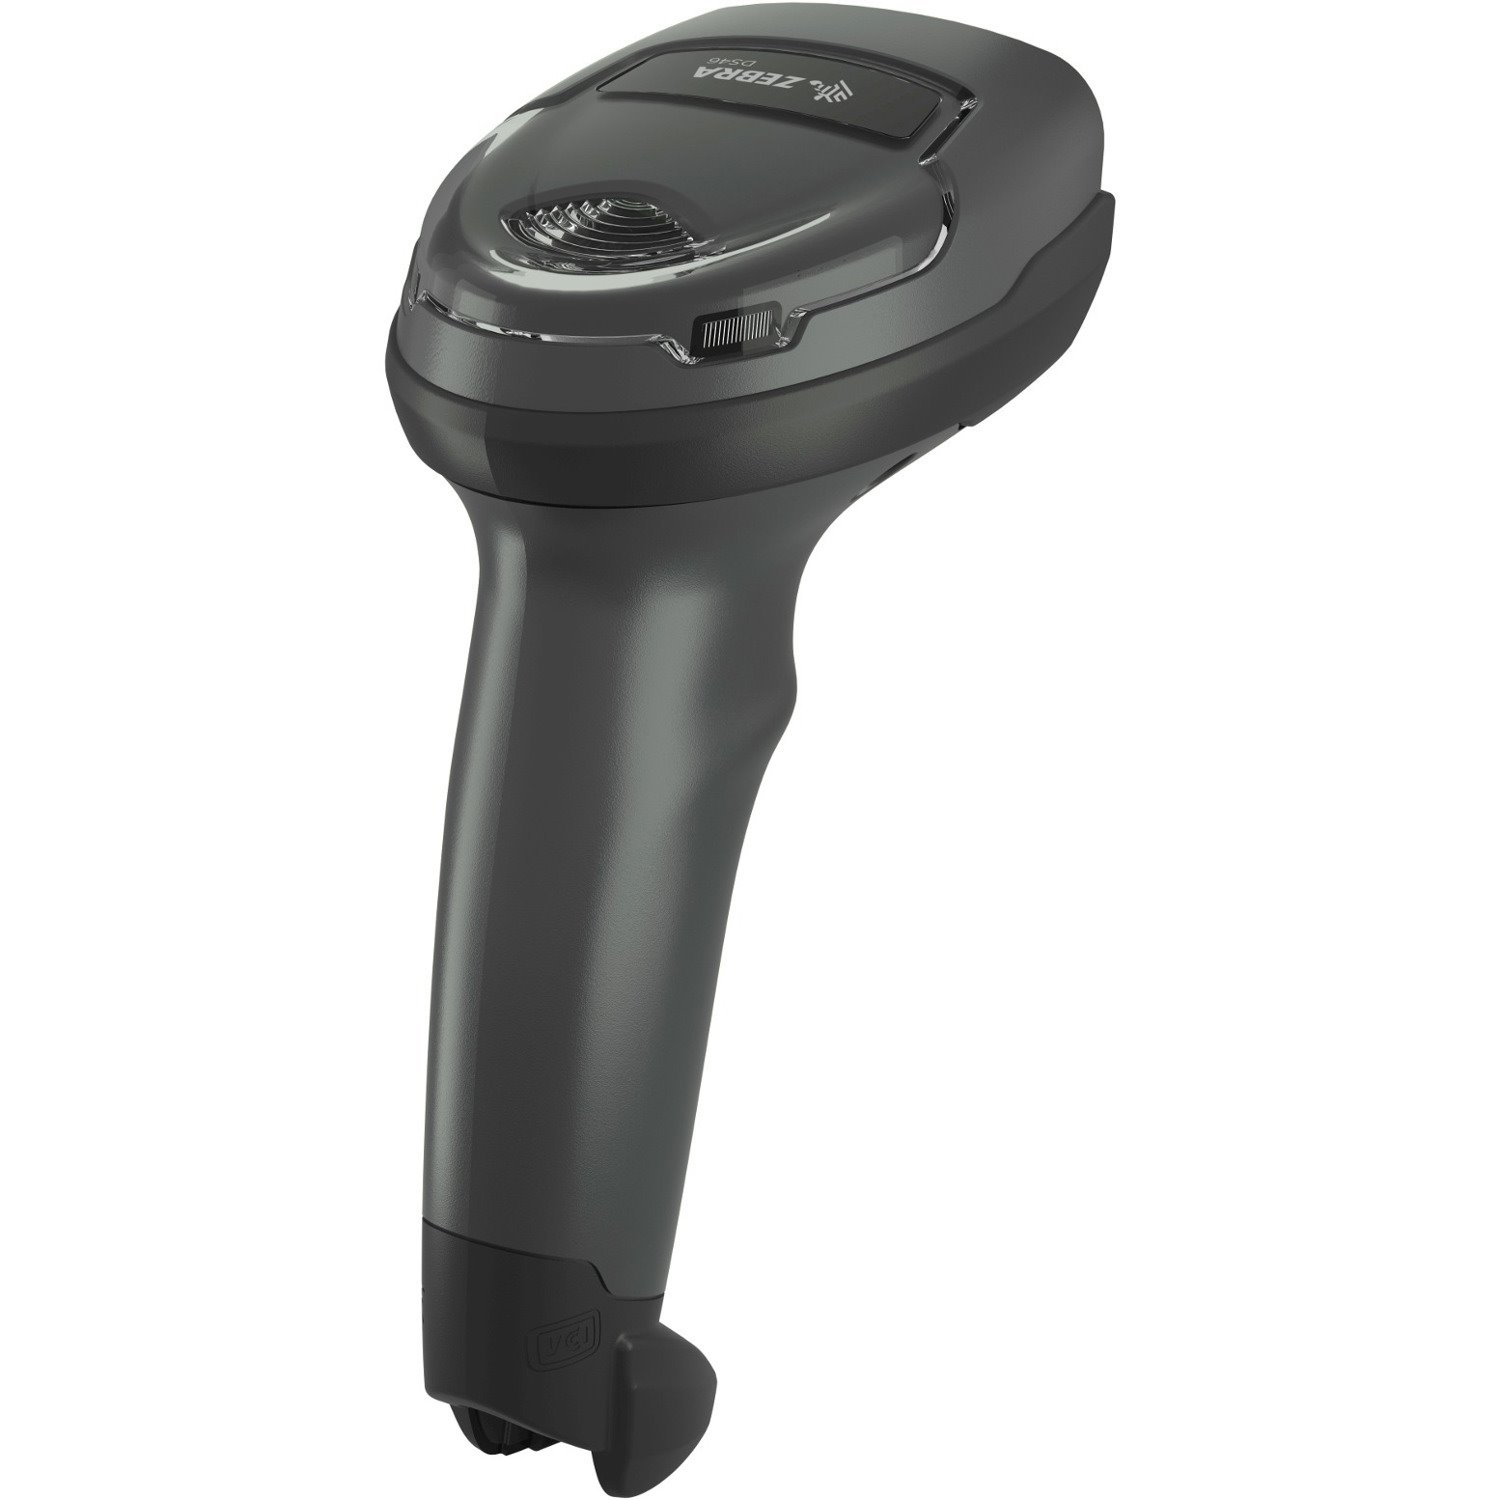 Zebra DS4608-HD Retail, Hospitality, Quick Service Restaurant (QSR), Inventory Handheld Barcode Scanner Kit - Cable Connectivity - Twilight Black - USB Cable Included